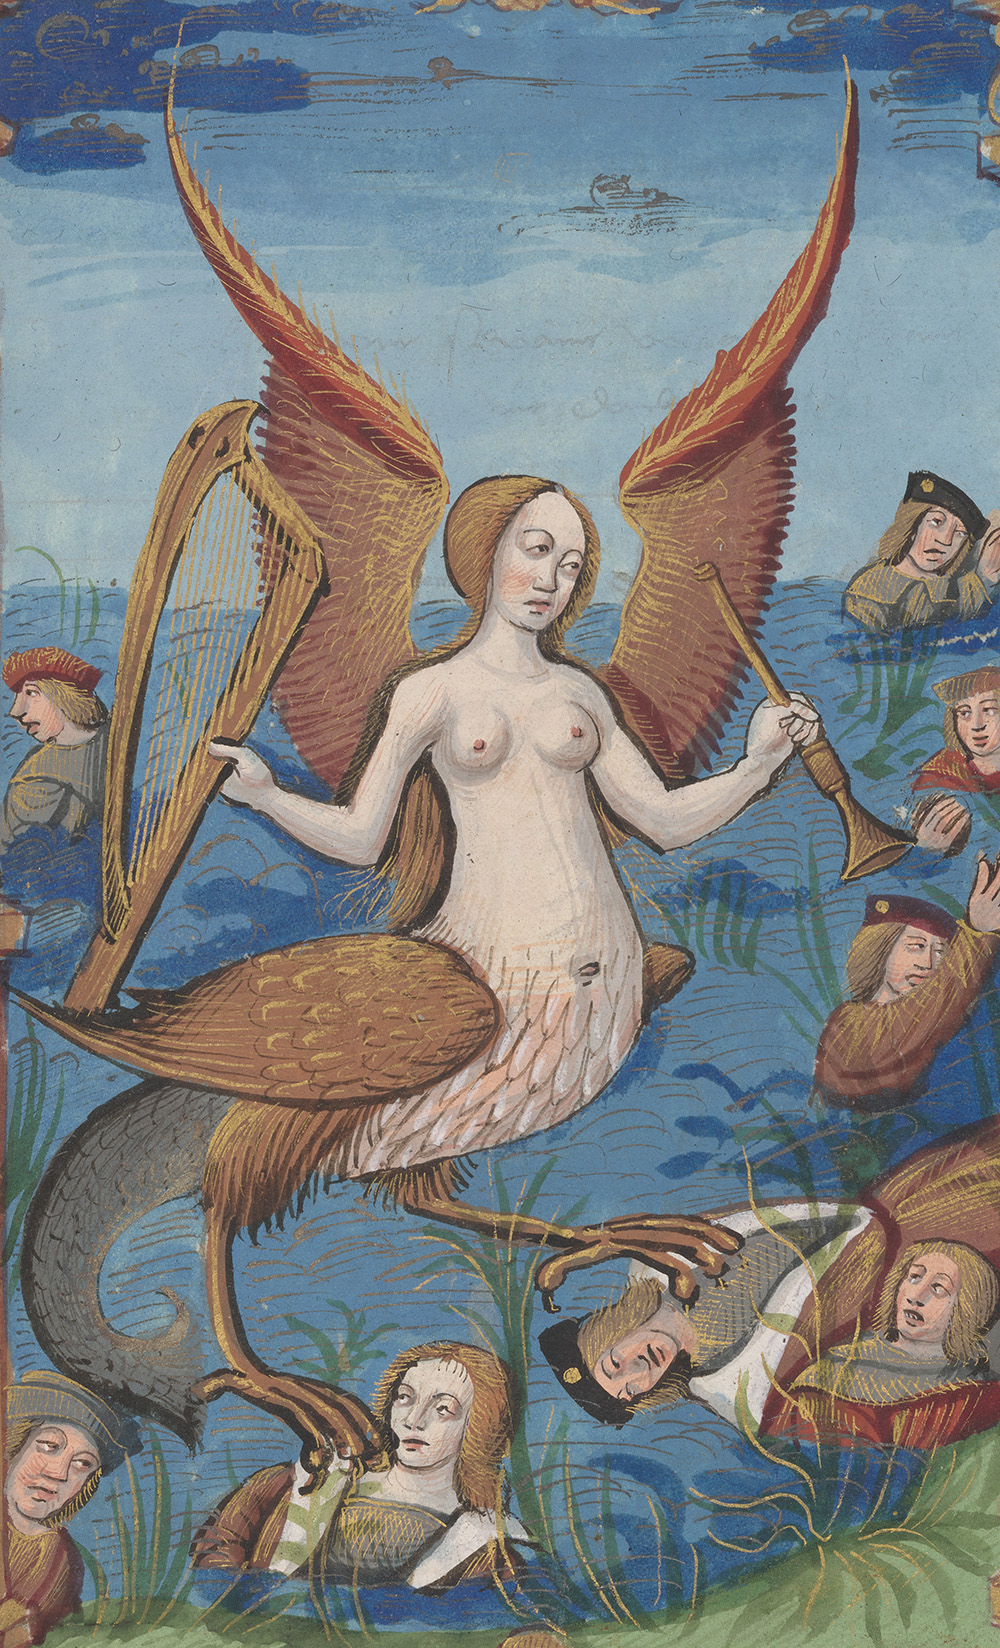 Image of Siren from 1510. A half-woman half bird monster attacks men drowning in a lake. She hold a harp and trumpet instrument.